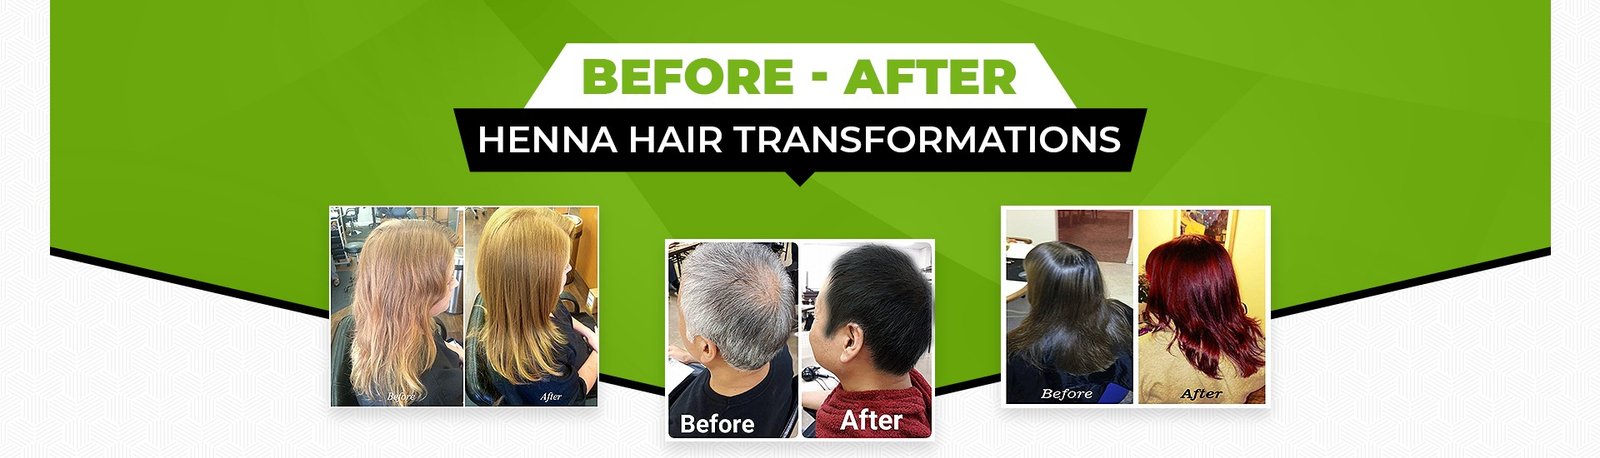 Henna Hair Transformation Before After